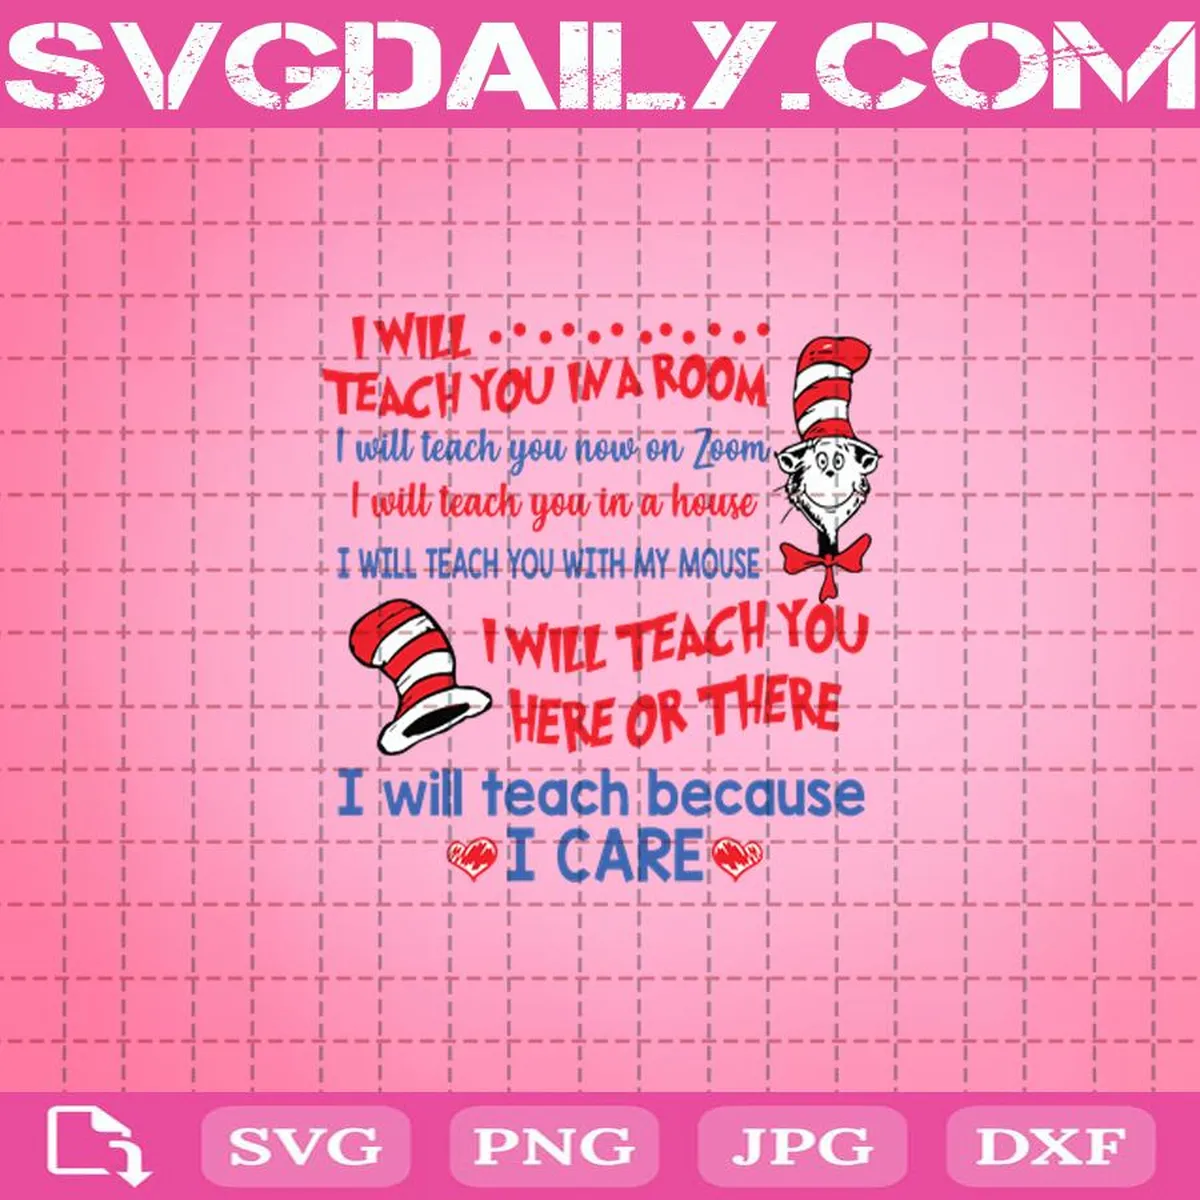 Dr Seuss I Will Teach You In A Room Svg, I Will Teach You Now On Zoom I Will Teach You Here Or There Svg, I Will Teach Because I Care Svg